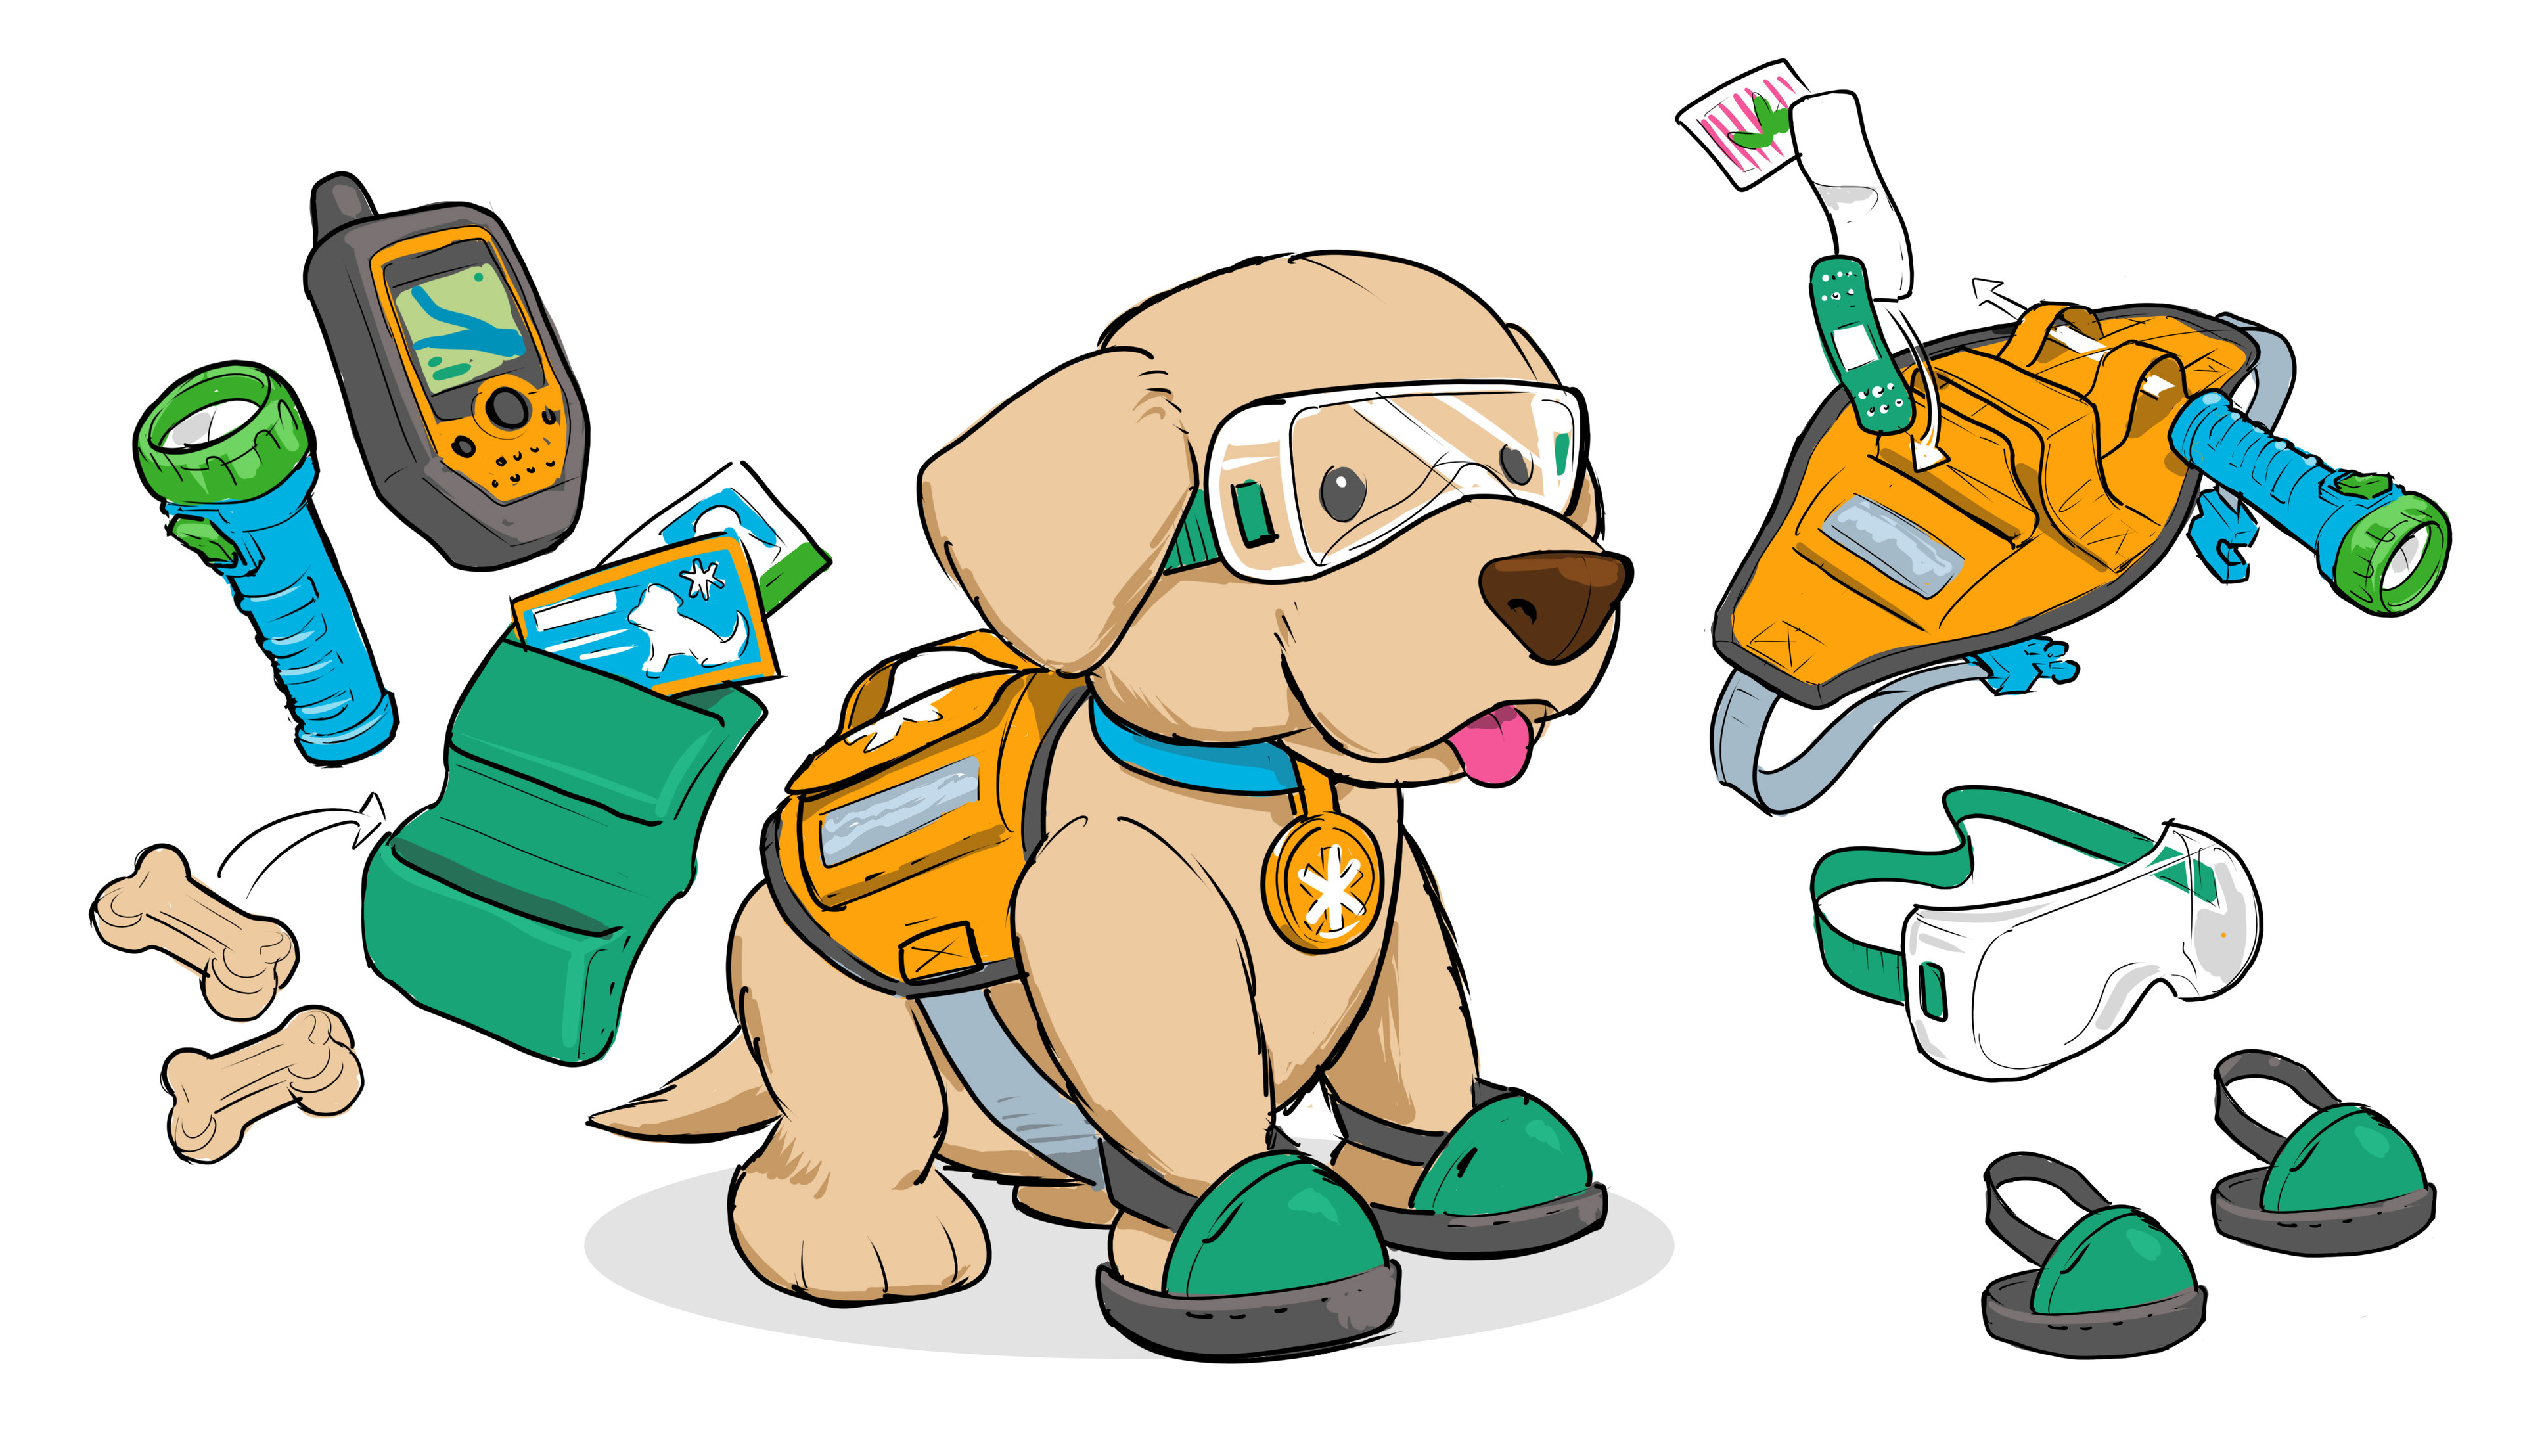 The Ranger Dog is one of my favorite sketches from my time at Melissa and Doug. I based this toy around an earlier plush offering, and tried to pack in as much play value as the little guy could carry!